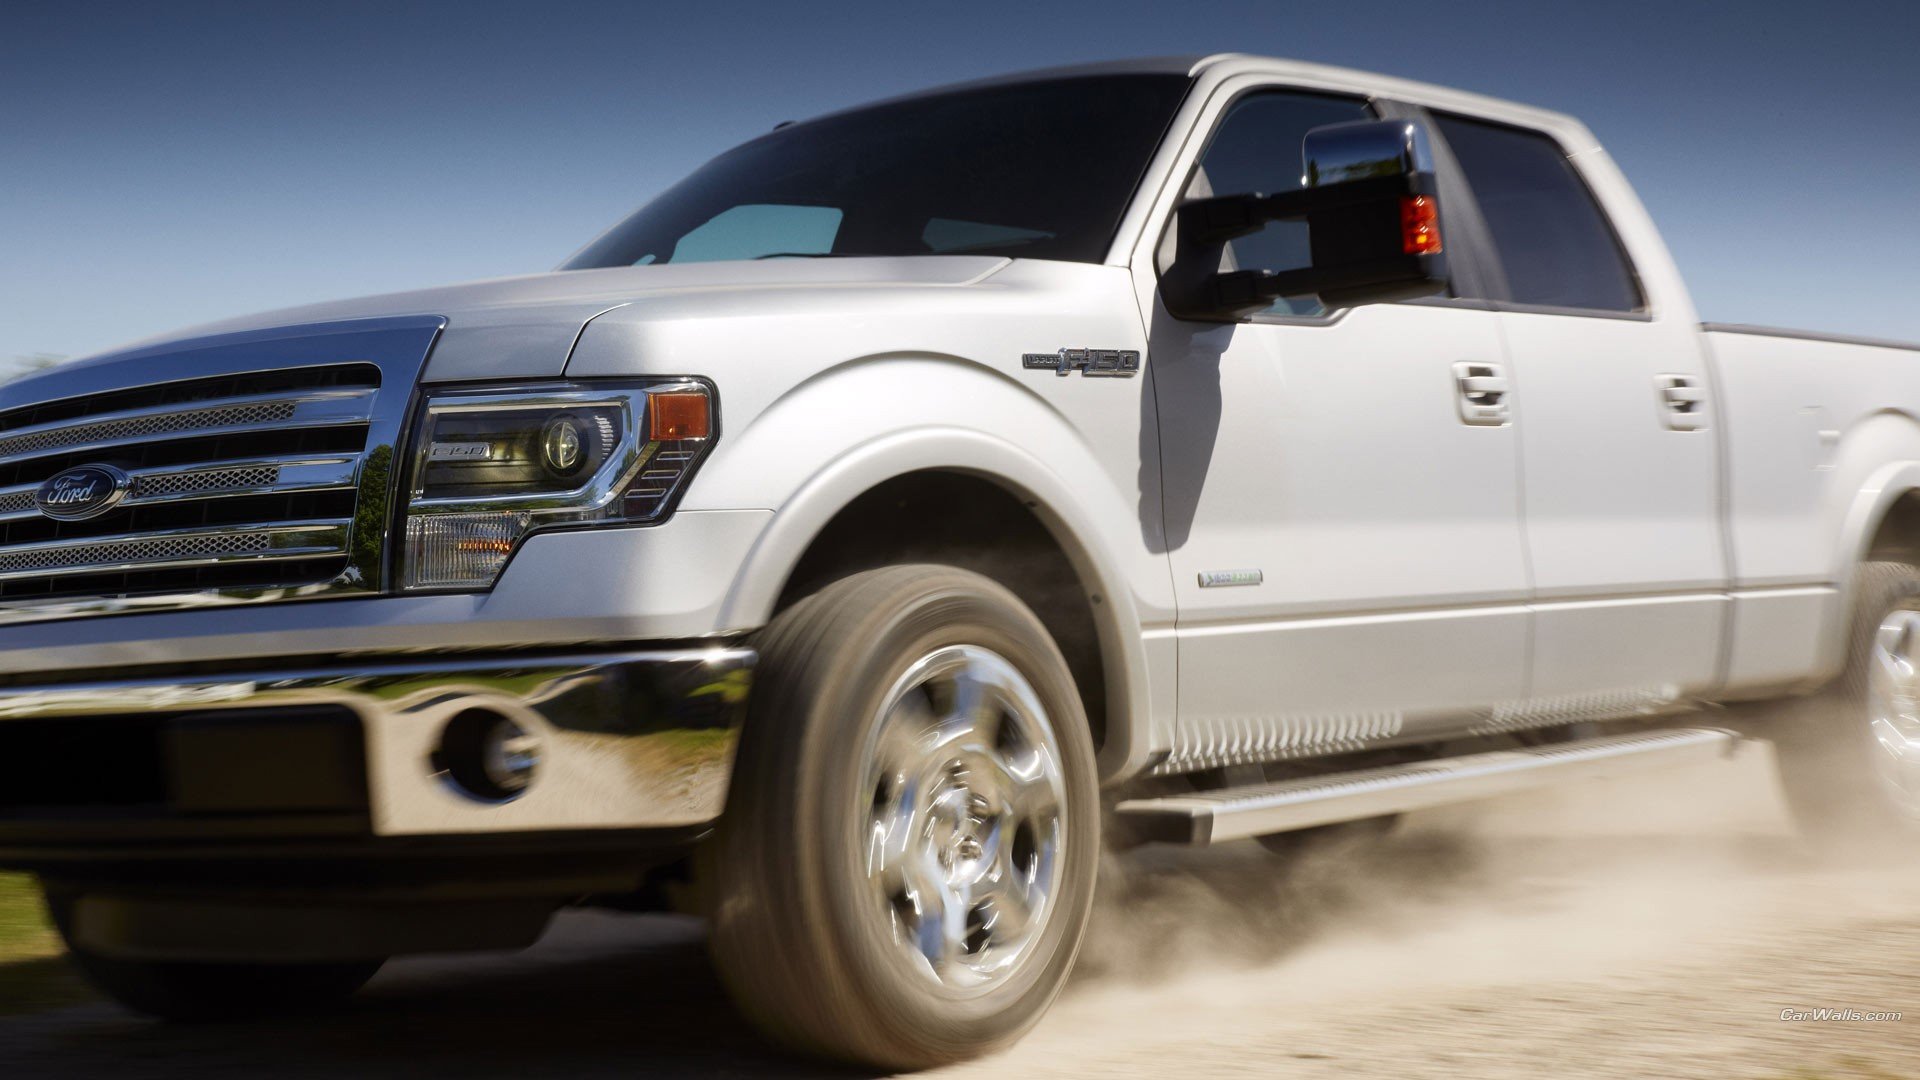 Awesome Ford F-150 free wallpaper ID:387501 for full hd 1920x1080 desktop